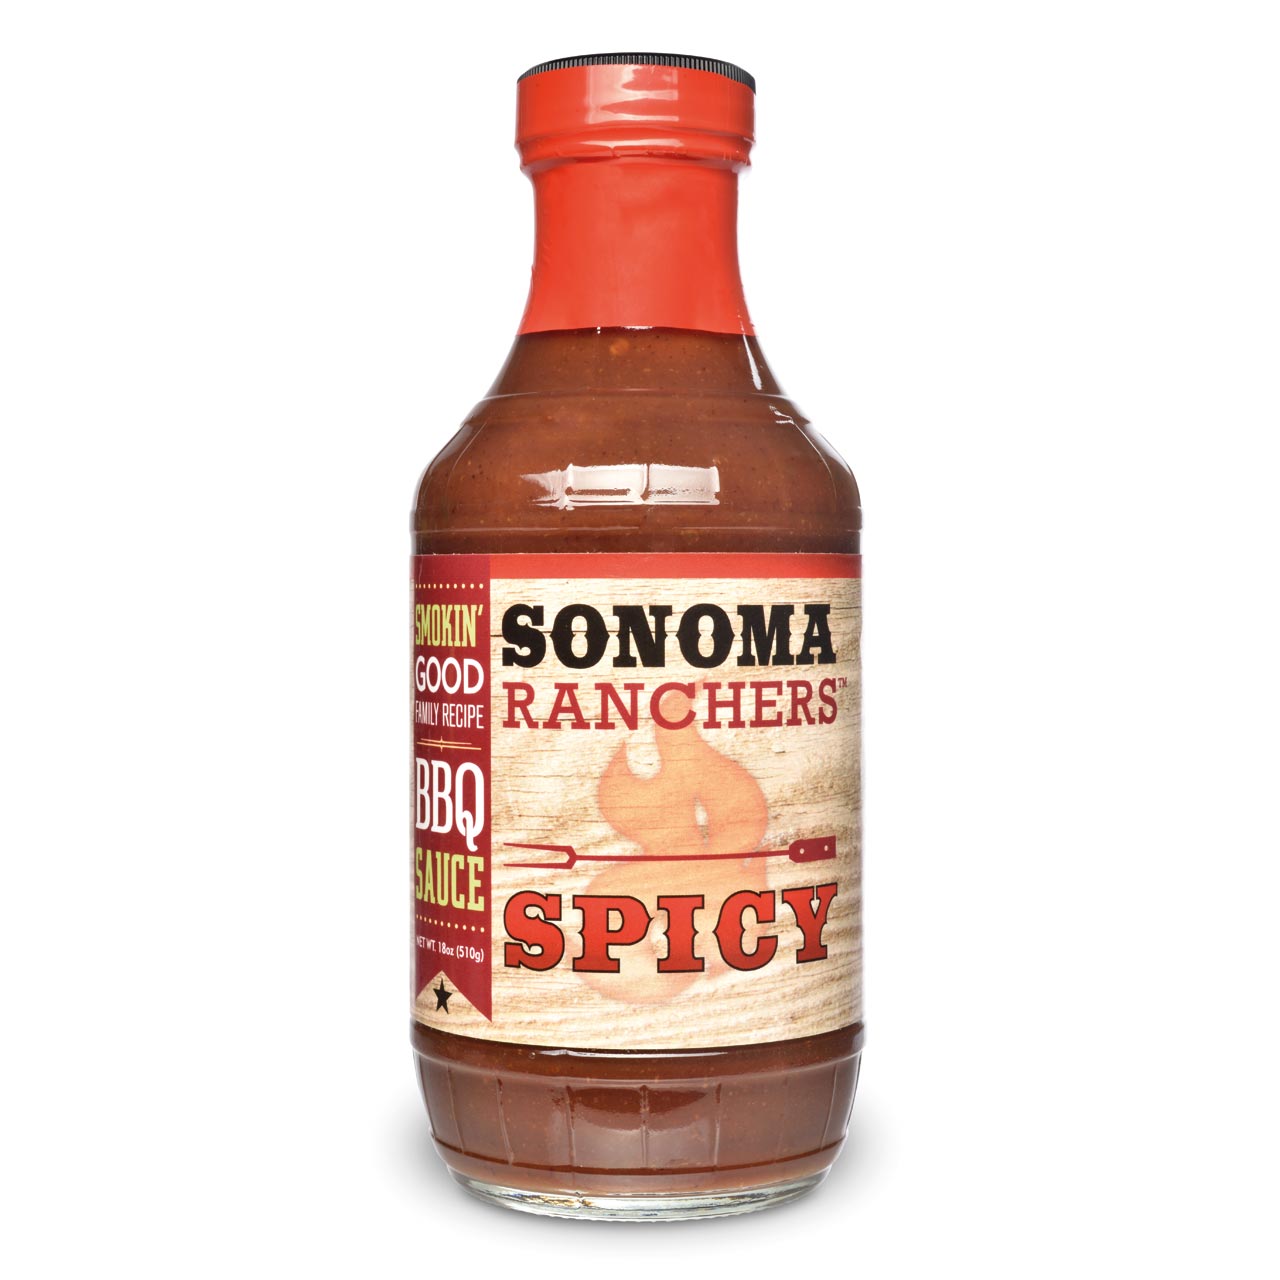 Sonoma Ranches - Spicy BBQ Sauce